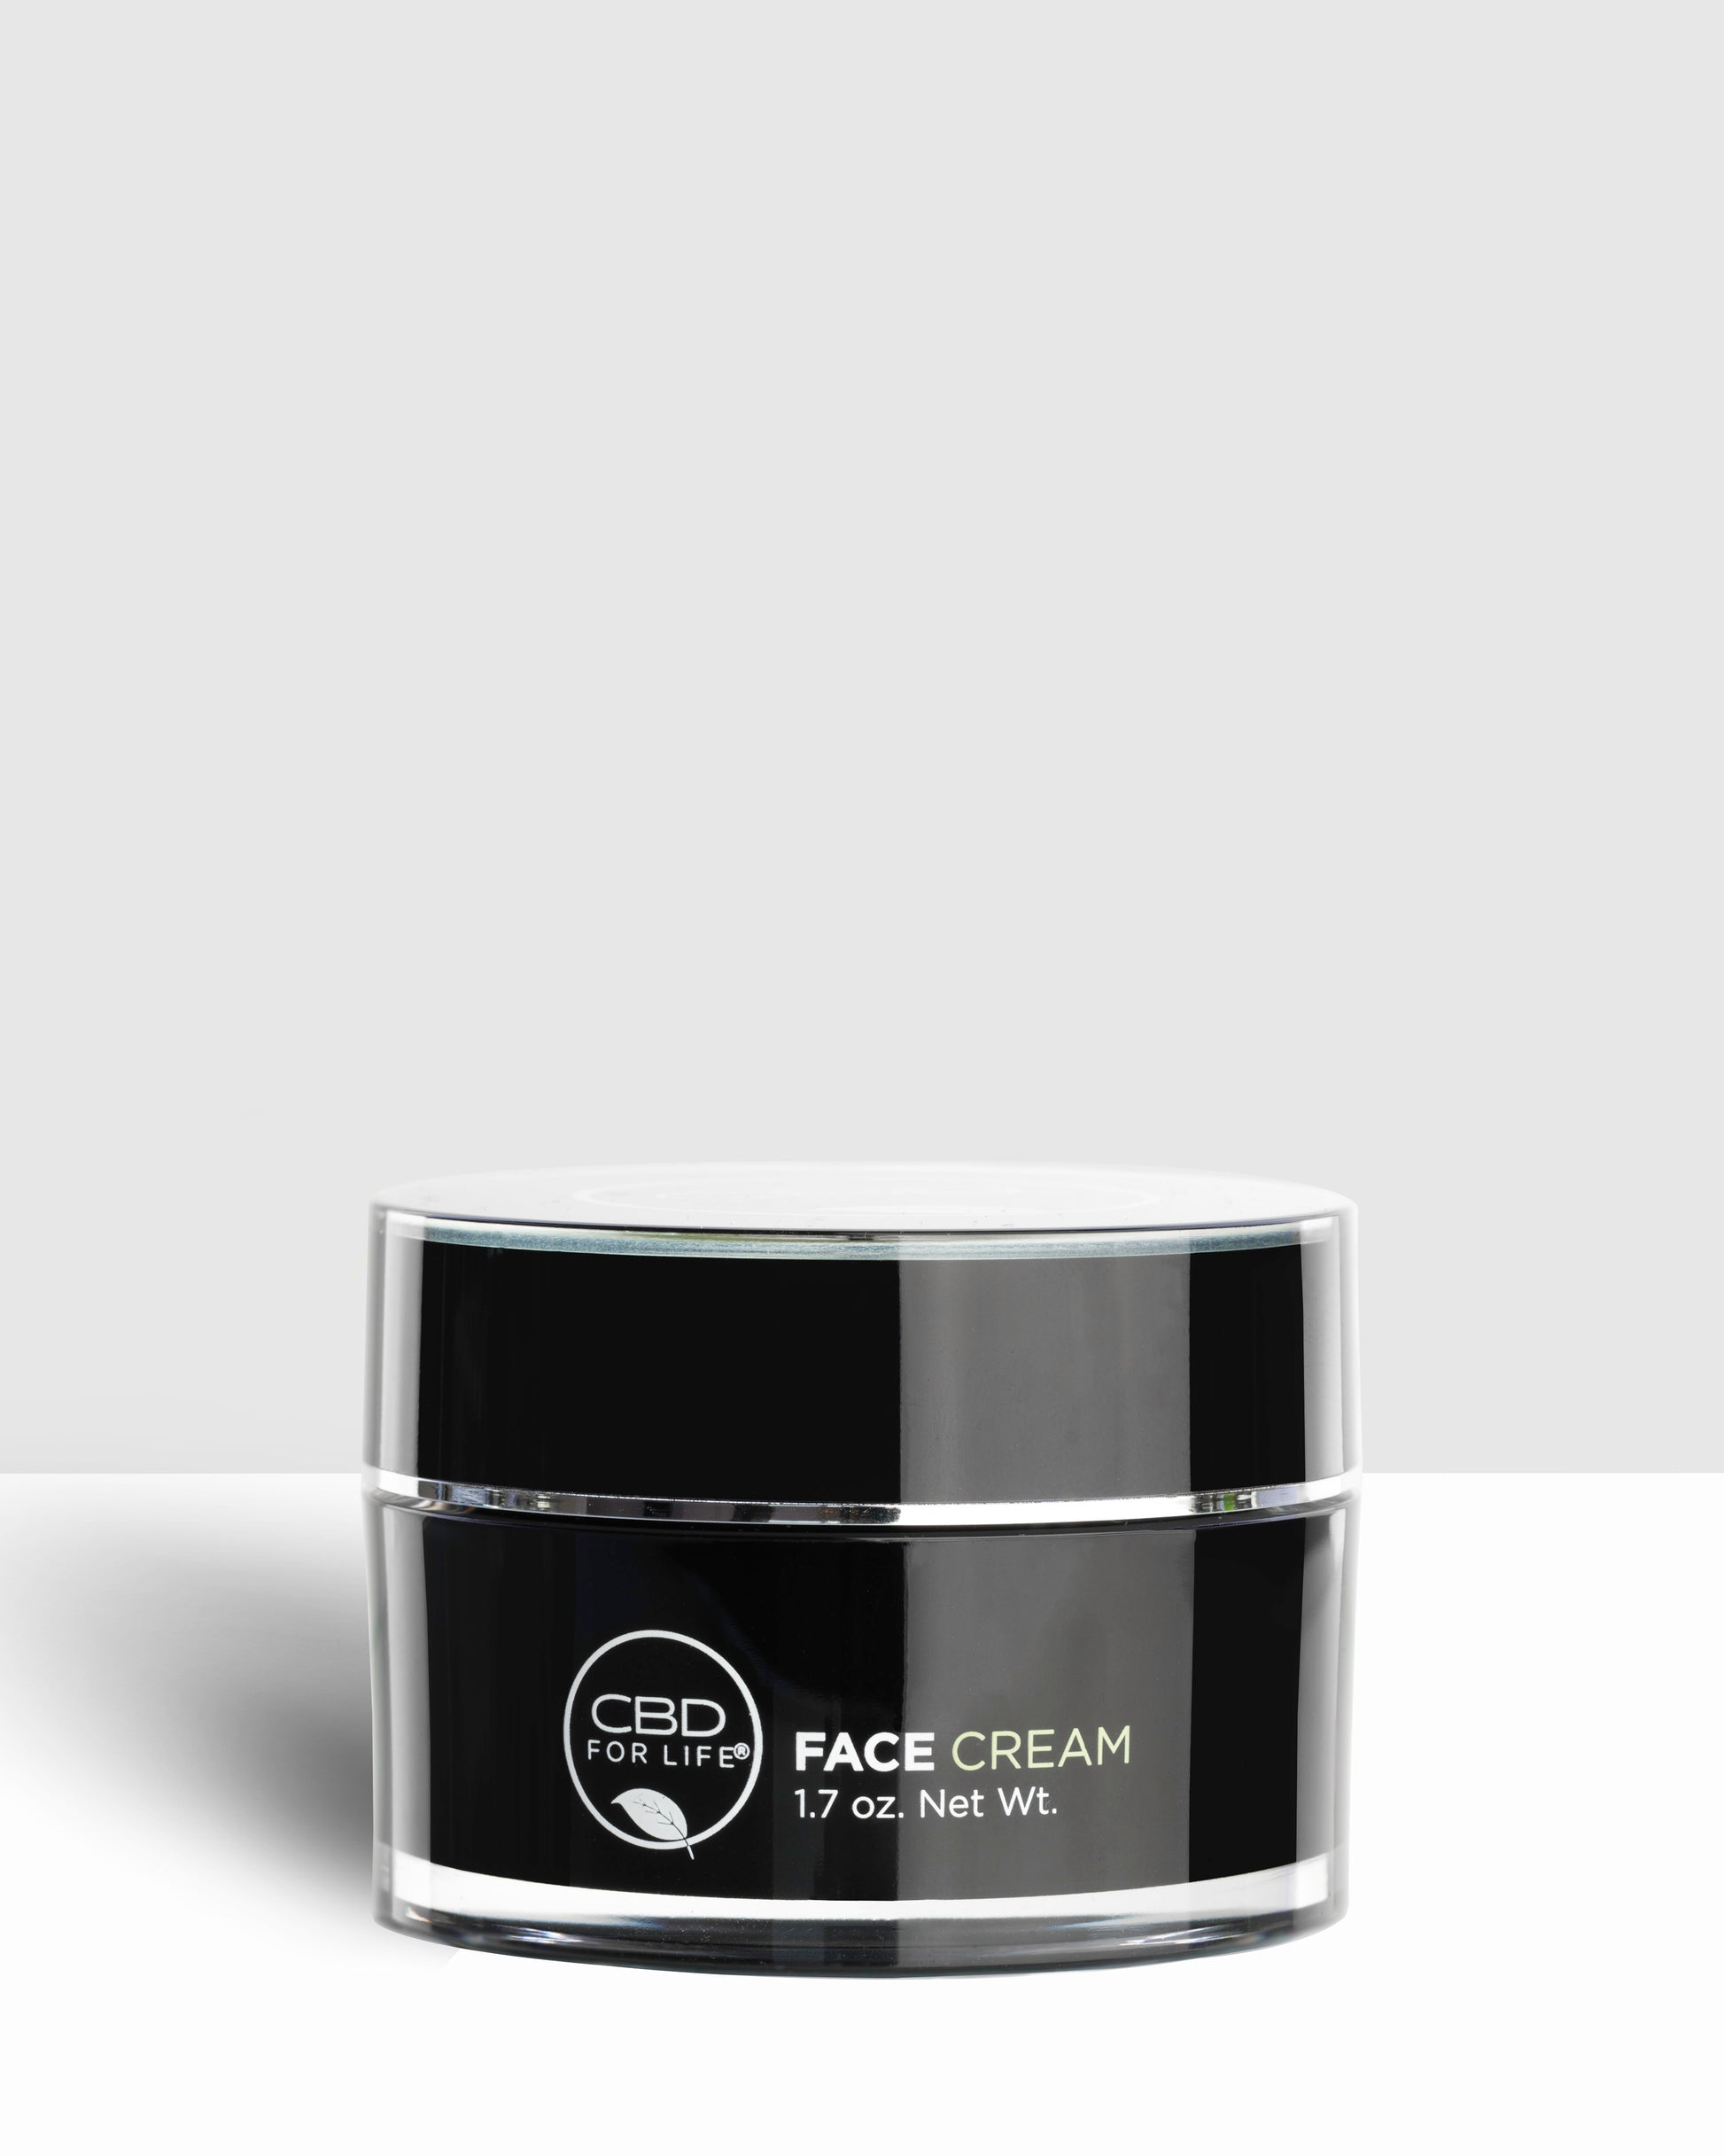 Applying our CBD Face Cream first thing in the morning can help speed up your quest for lit-from-within radiance. We loaded our CBD Face Cream with key ingredients that work together to deliver the results you want and need (most notably, hydration). Here, a breakdown of what makes our CBD Face Cream a fan favorite.